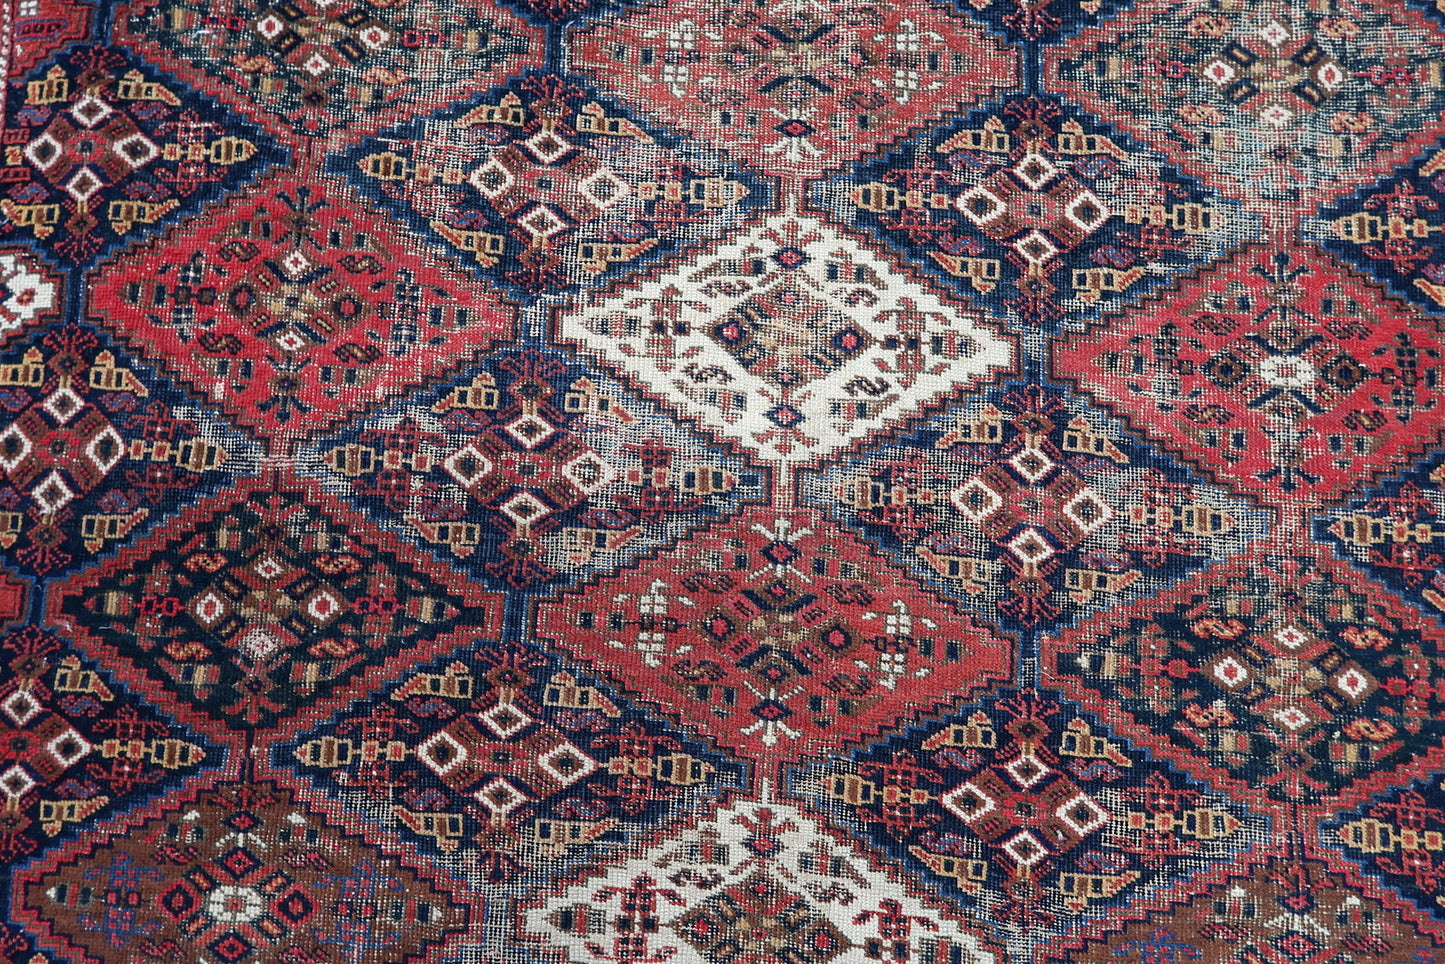 Handmade antique Persian rug from Afshar region. The rug is from the beginning of 20th century in distressed condition.